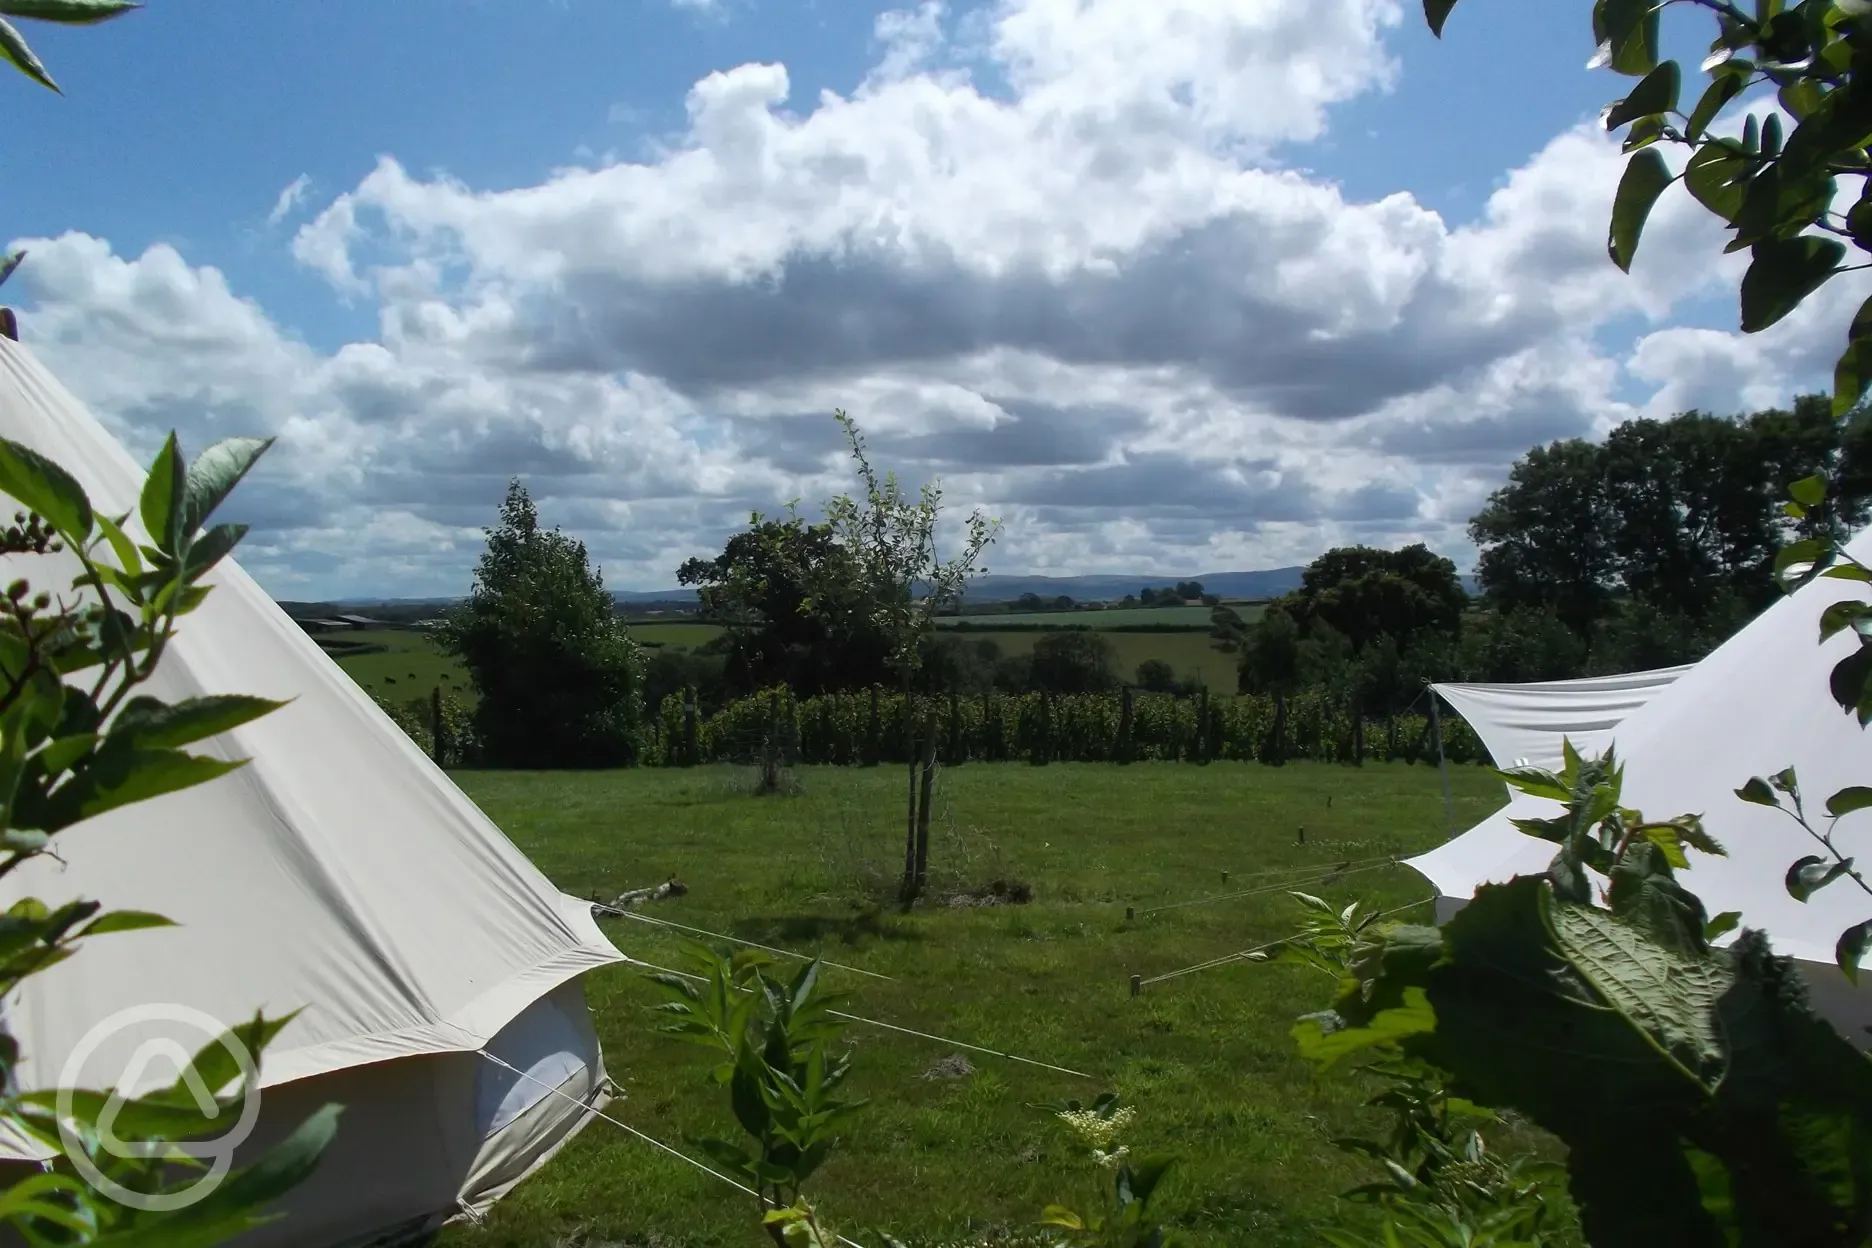 Stay in one of our two spacious unfurnished bell tents . Both tents come with a zipped in ground sheet and an awning and we provide you with a brazier for a campfire.